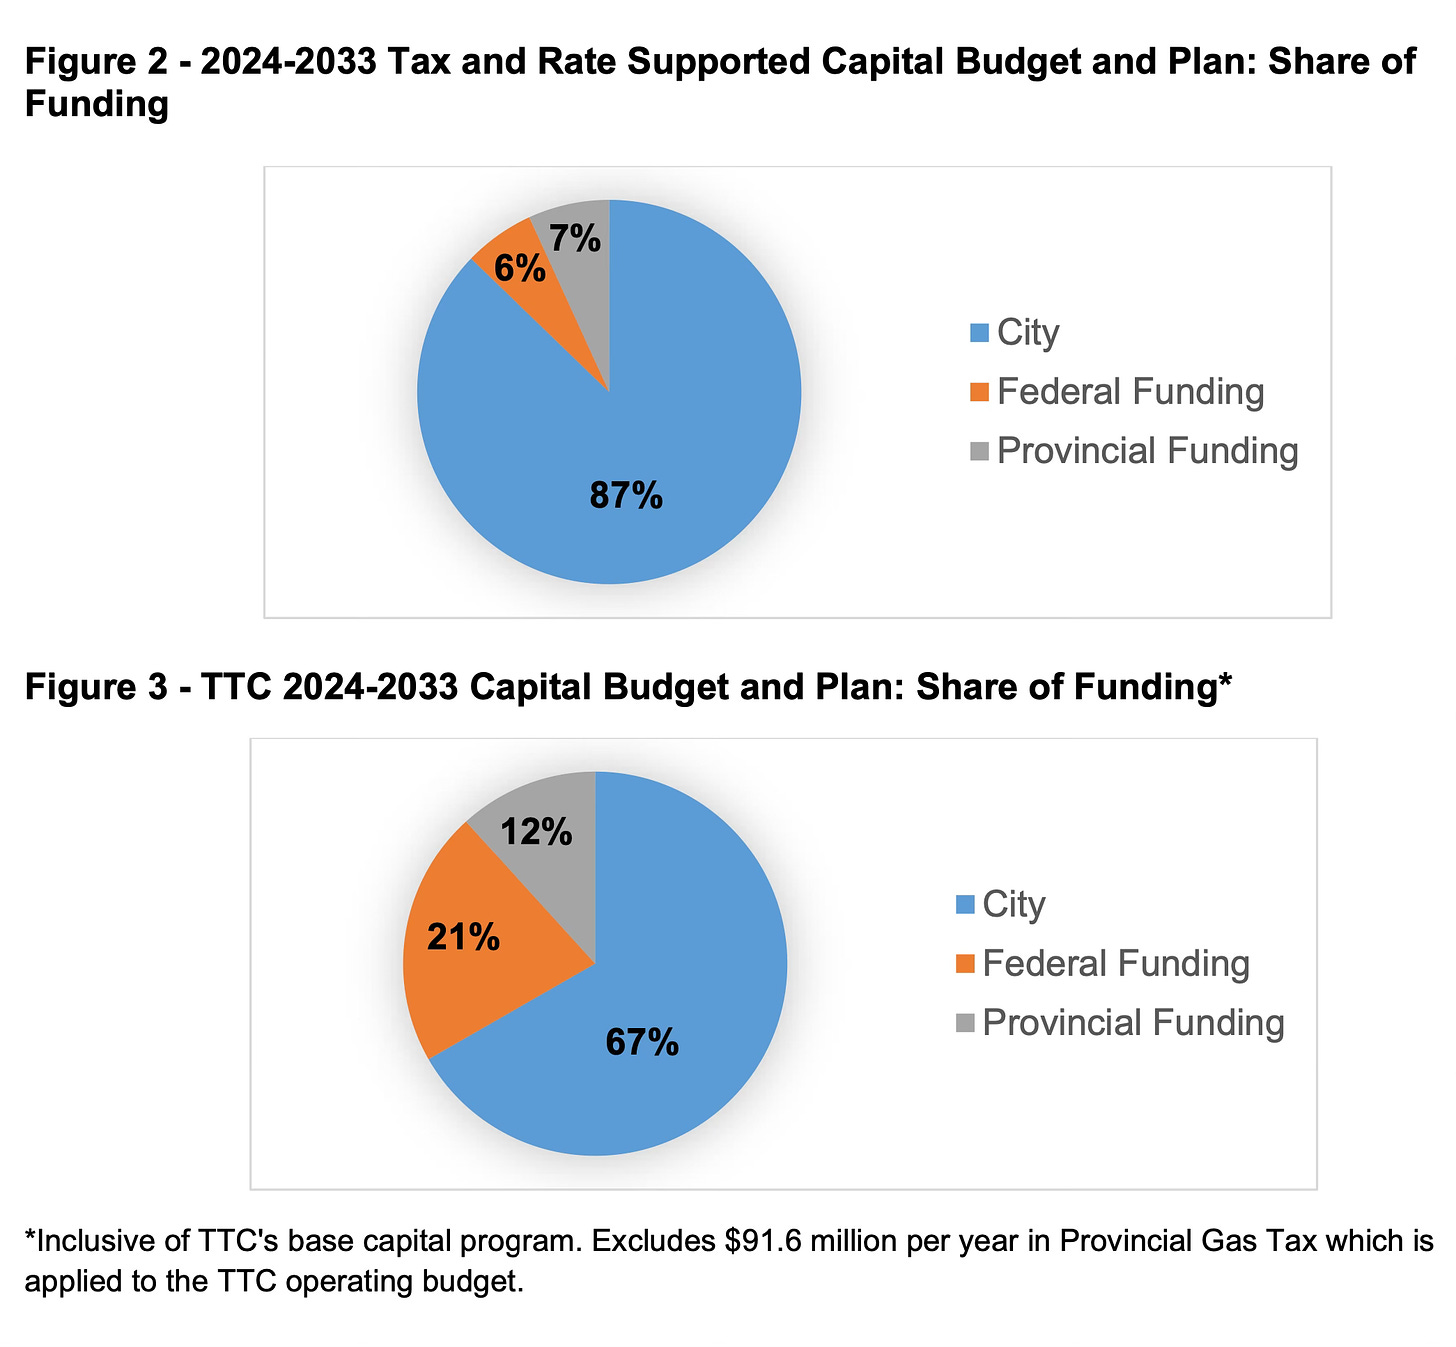 Two pie charts, showing the share of city, federal and provincial funding in the overall capital plan and the TTC's capital plan